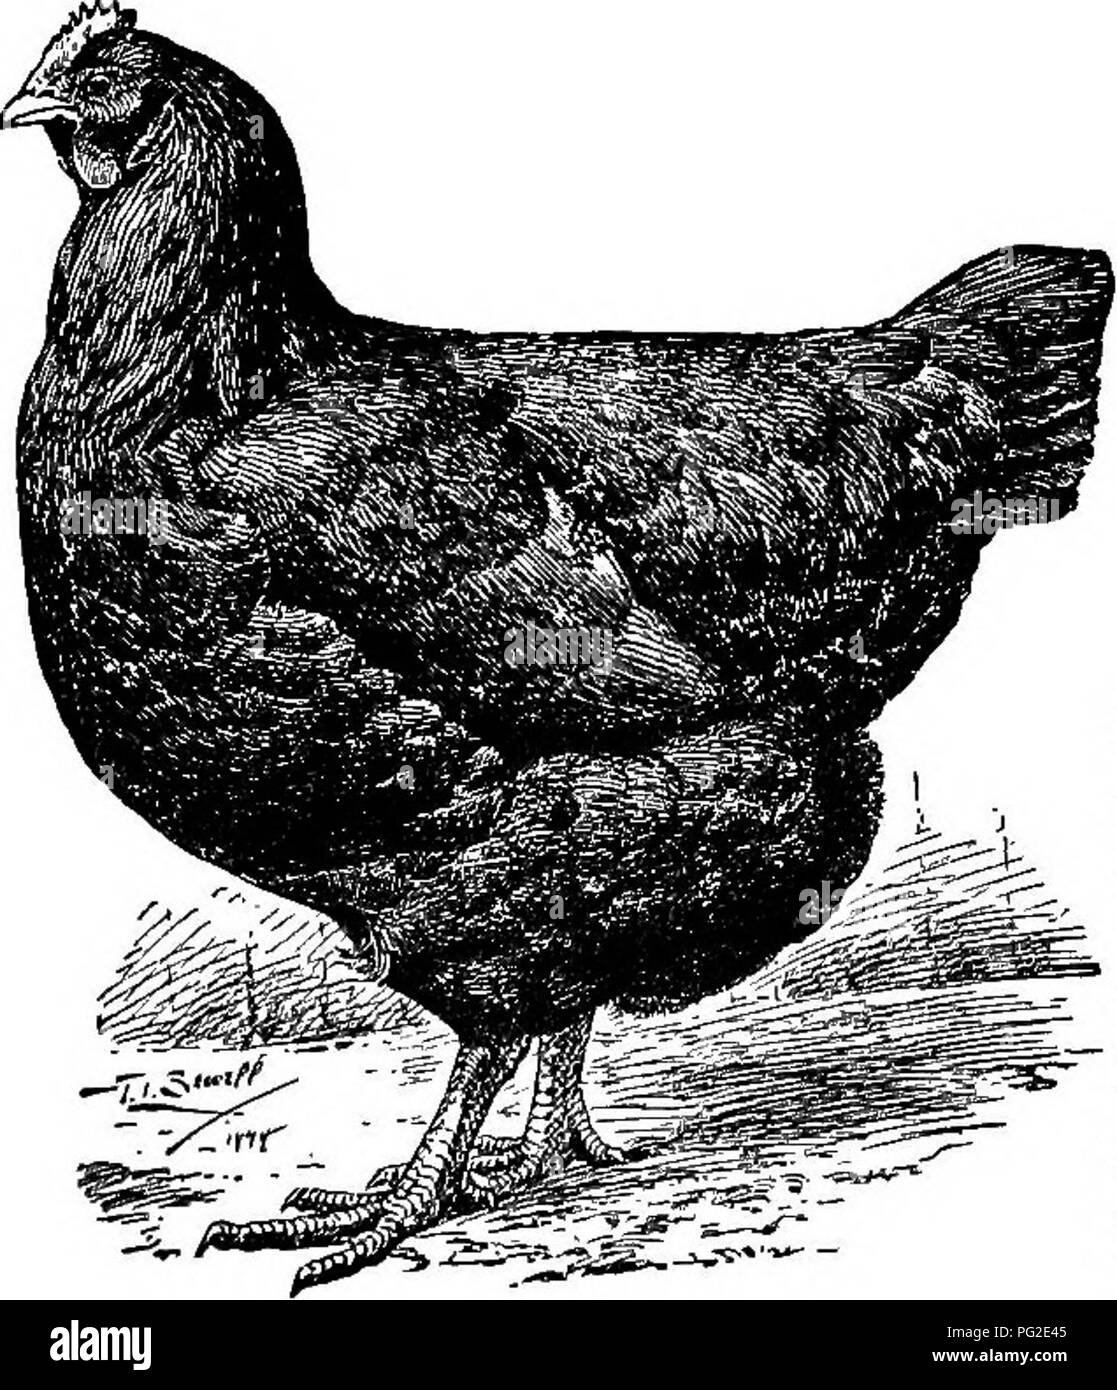 Poultry-craft. A text-book for poultry keepers ... Poultry. White  Wyandottes. The remarks on breeding Buff P. Rocks apply also to Buff  Wyandottes. 74. Javas.âBlack and Mottled. Fig. 55. ââ Javas are